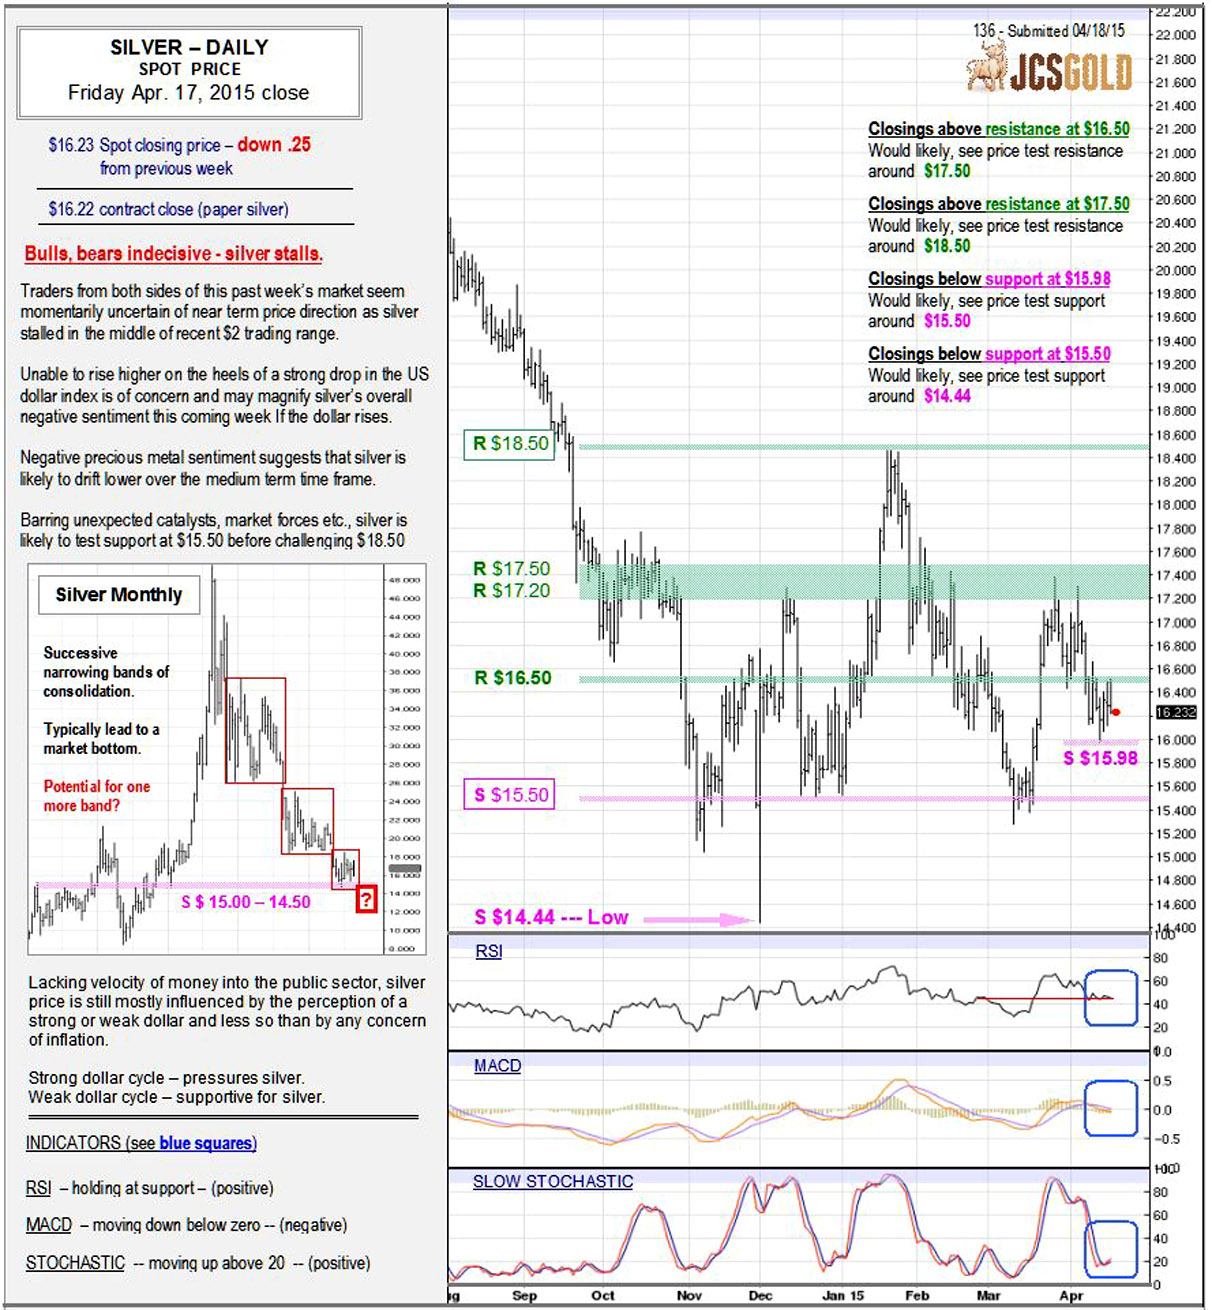 Apr 17, 2015 chart & commentary